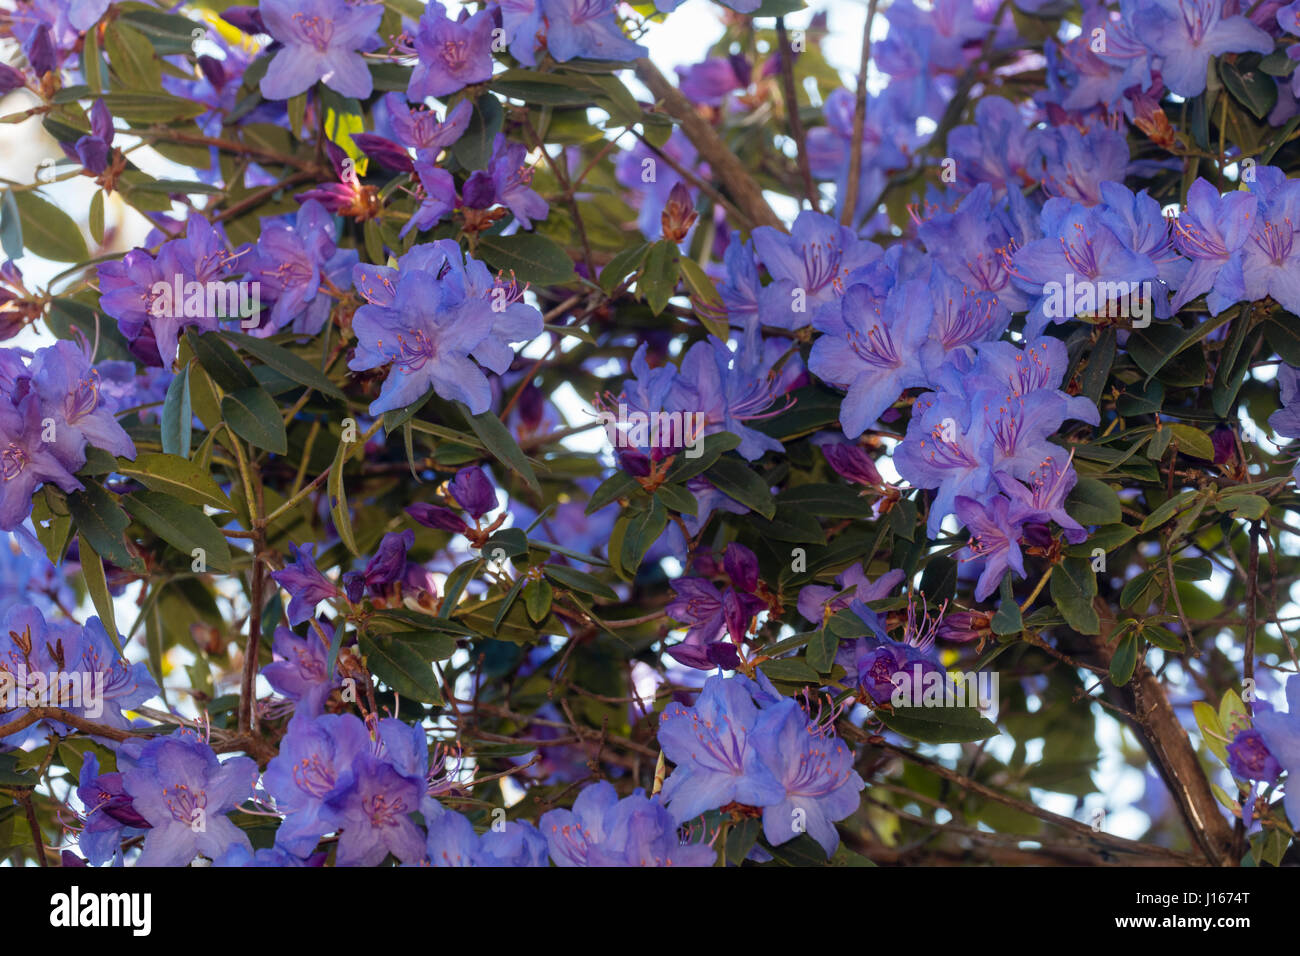 Violet blue flowers of the hardy evergreen shrub, Rhododendron augustinii 'Borde Hill' Stock Photo